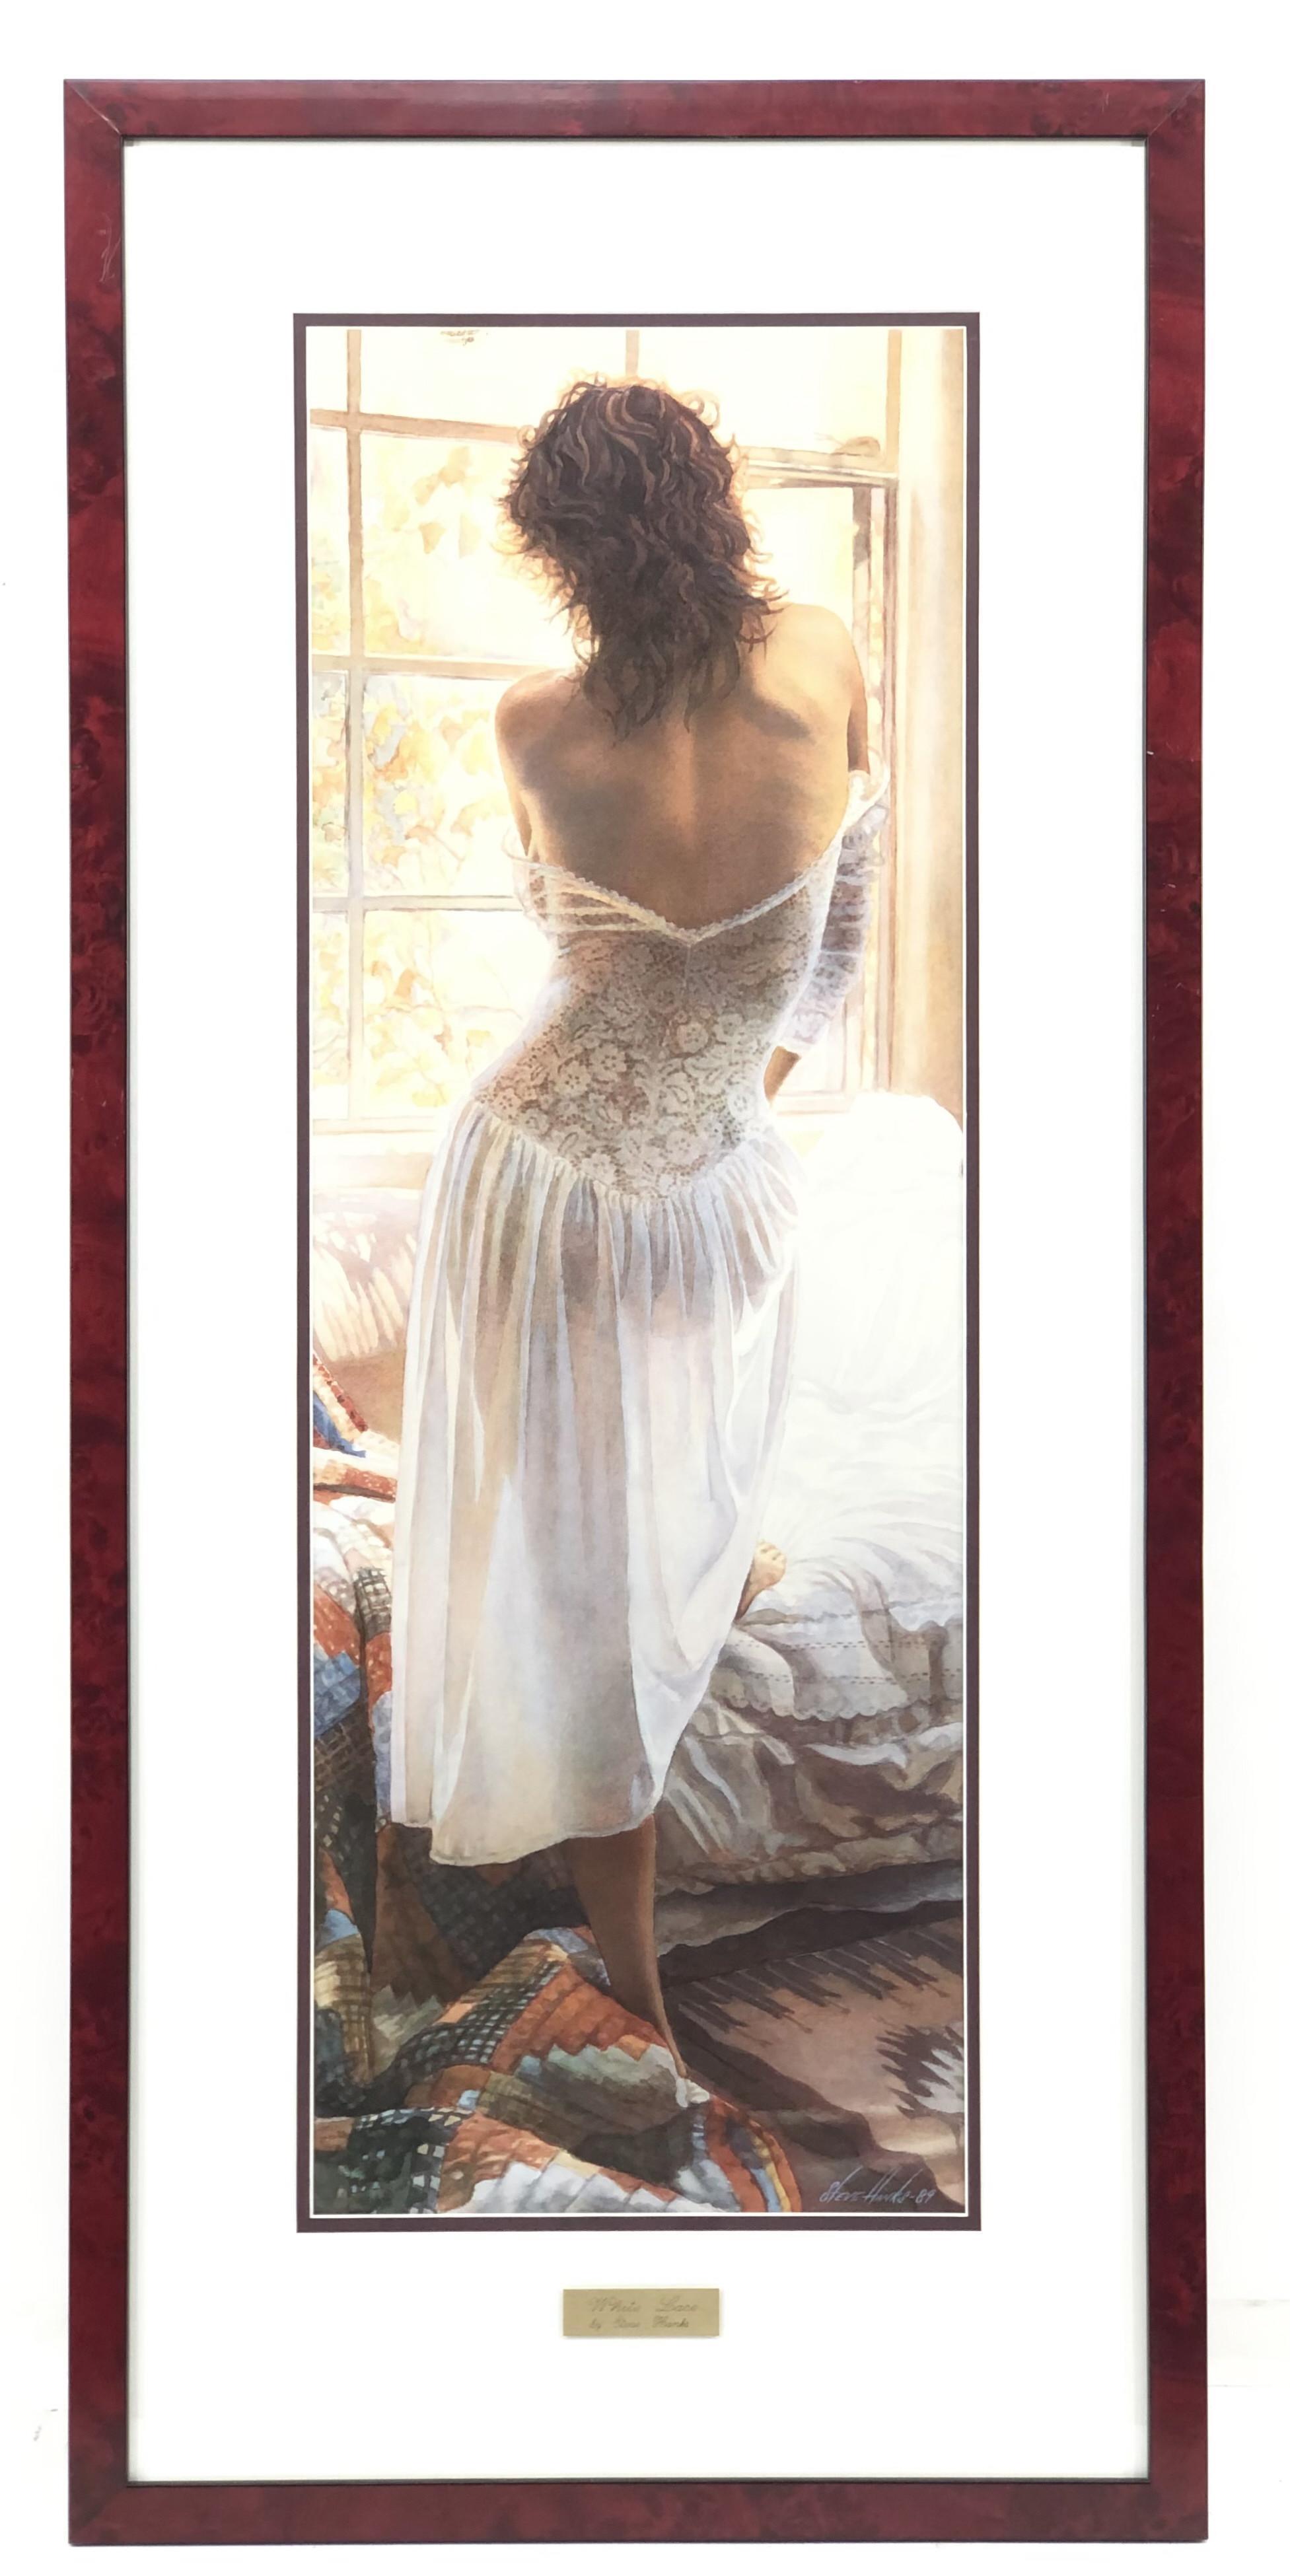 "WHITE LACE" by Steve Hanks, 1980